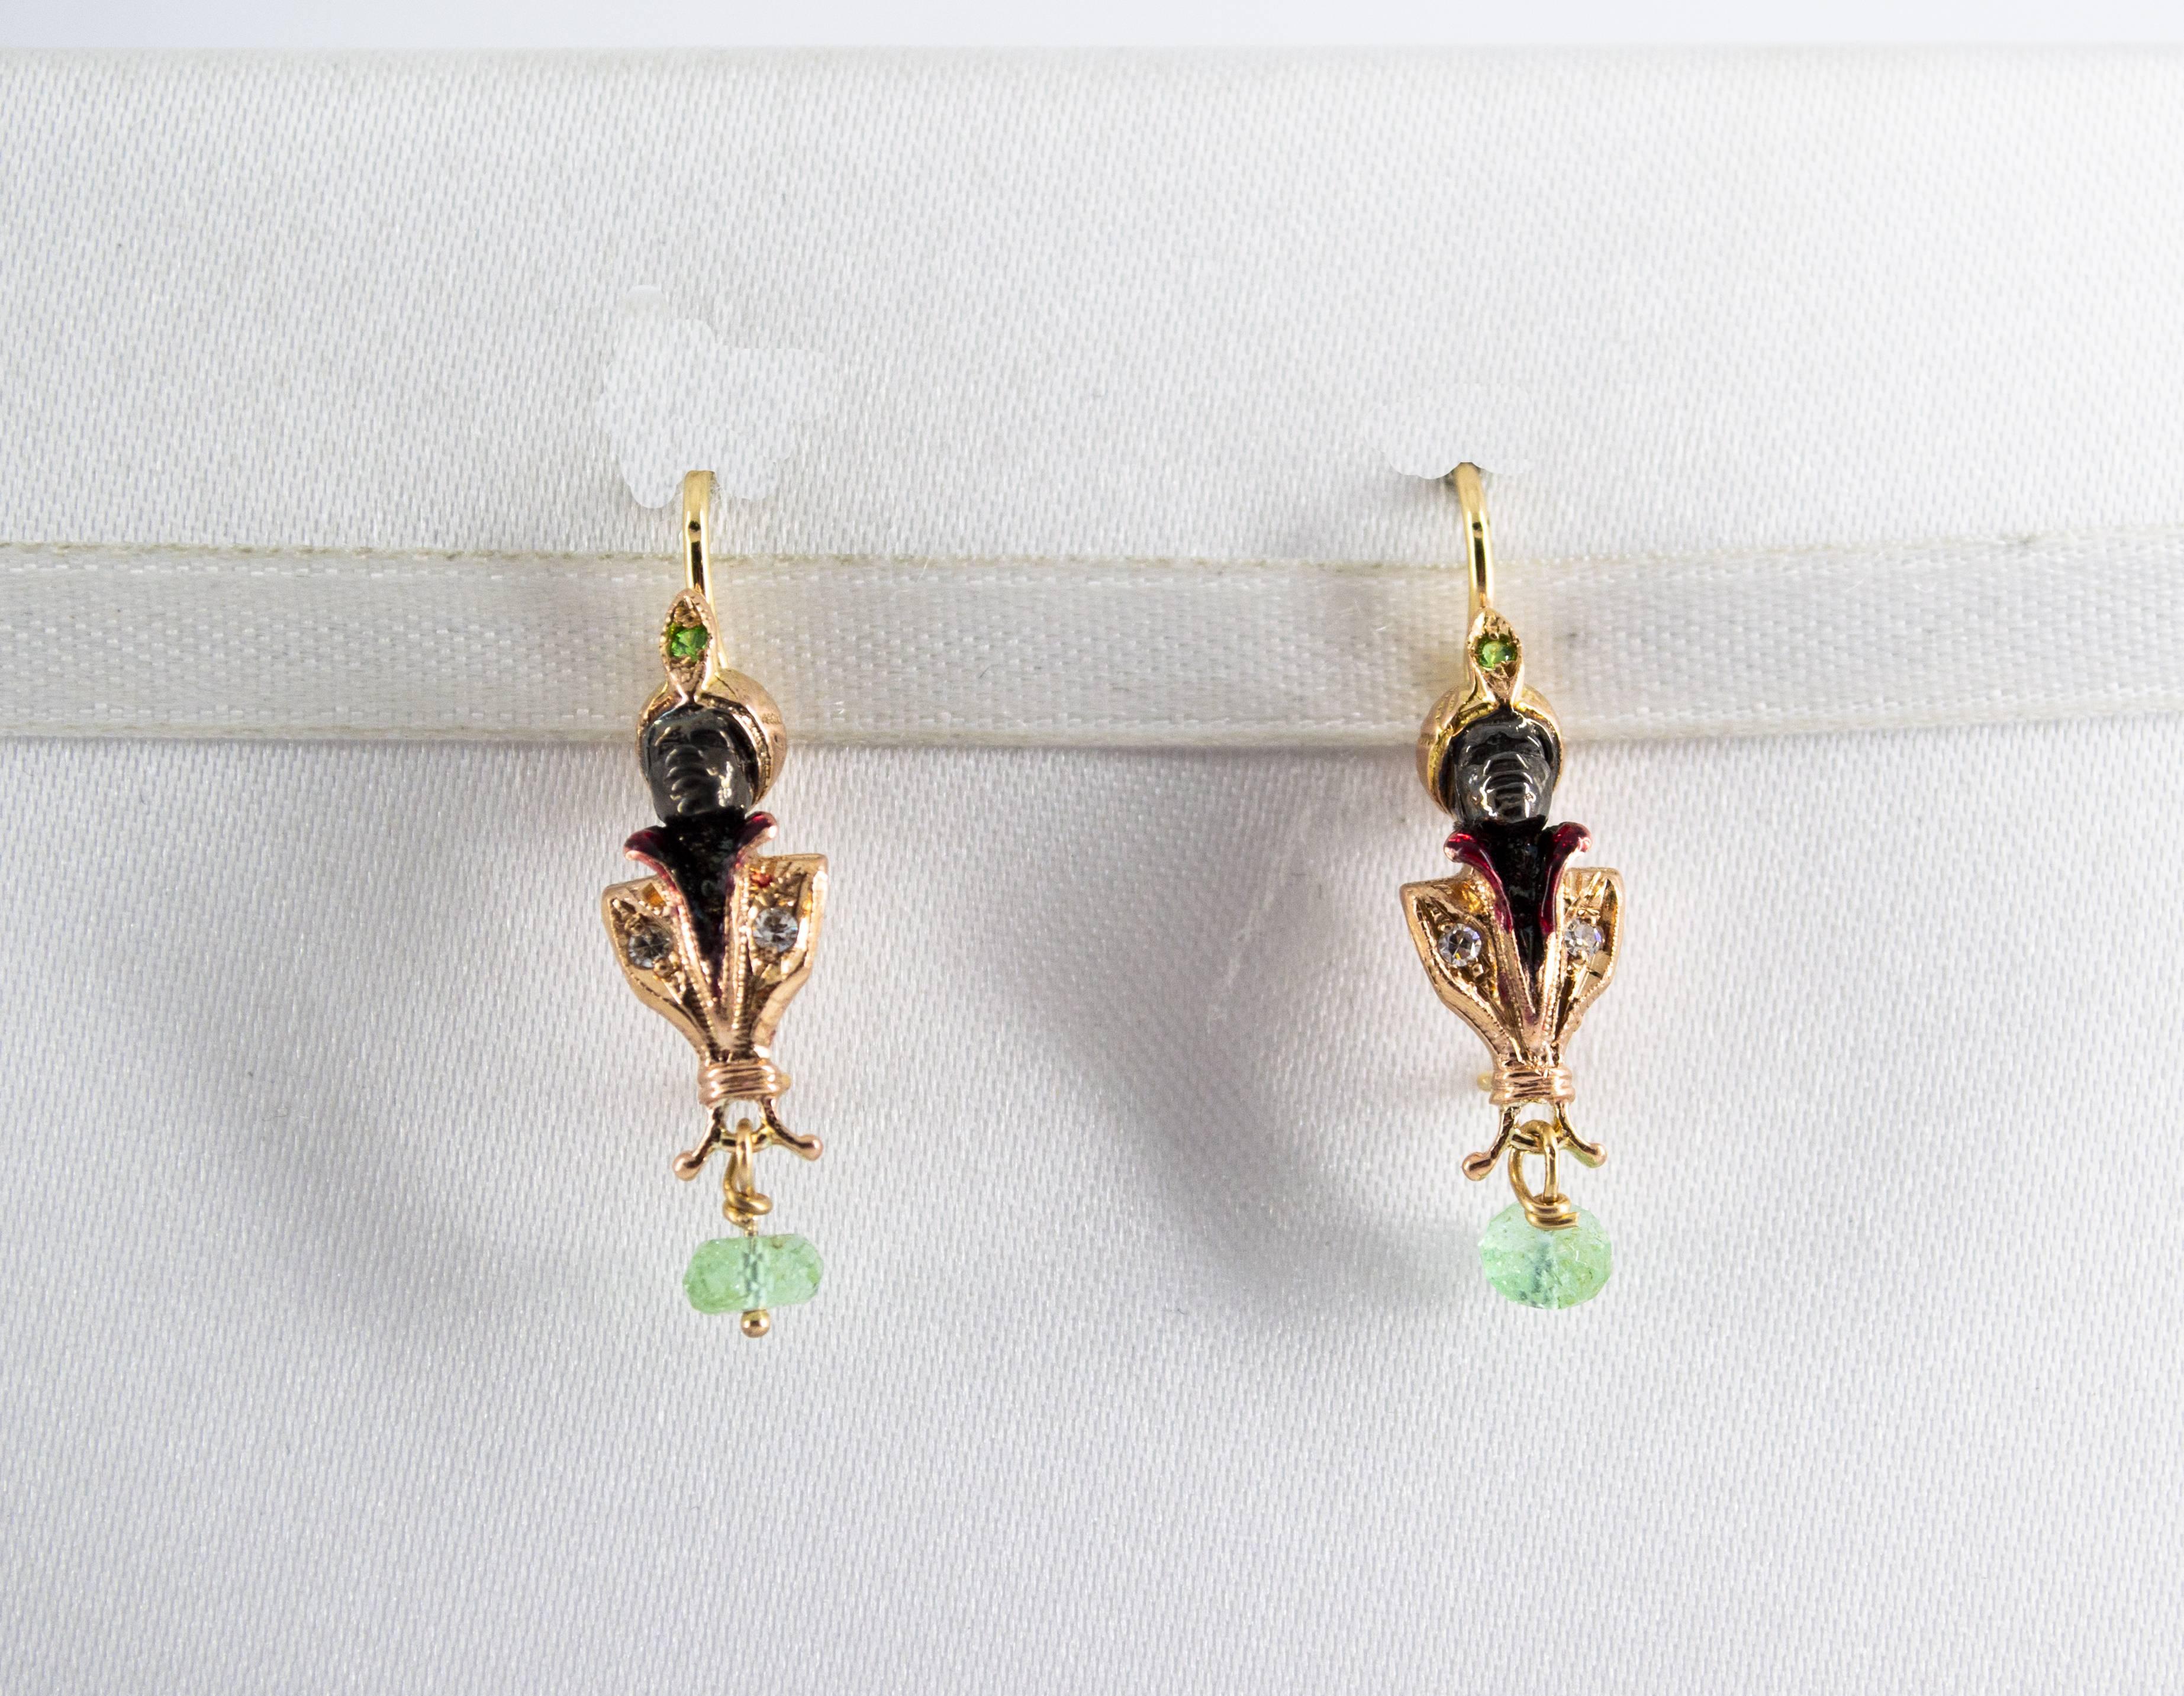 These Earrings are made of 9K Yellow Gold and Sterling Silver.
These Earrings have 0.08 Carats of Diamonds.
These Earrings have 0.20 Carats of Emeralds.
These Earrings have also Tsavorite.
We're a workshop so every piece is handmade, customizable